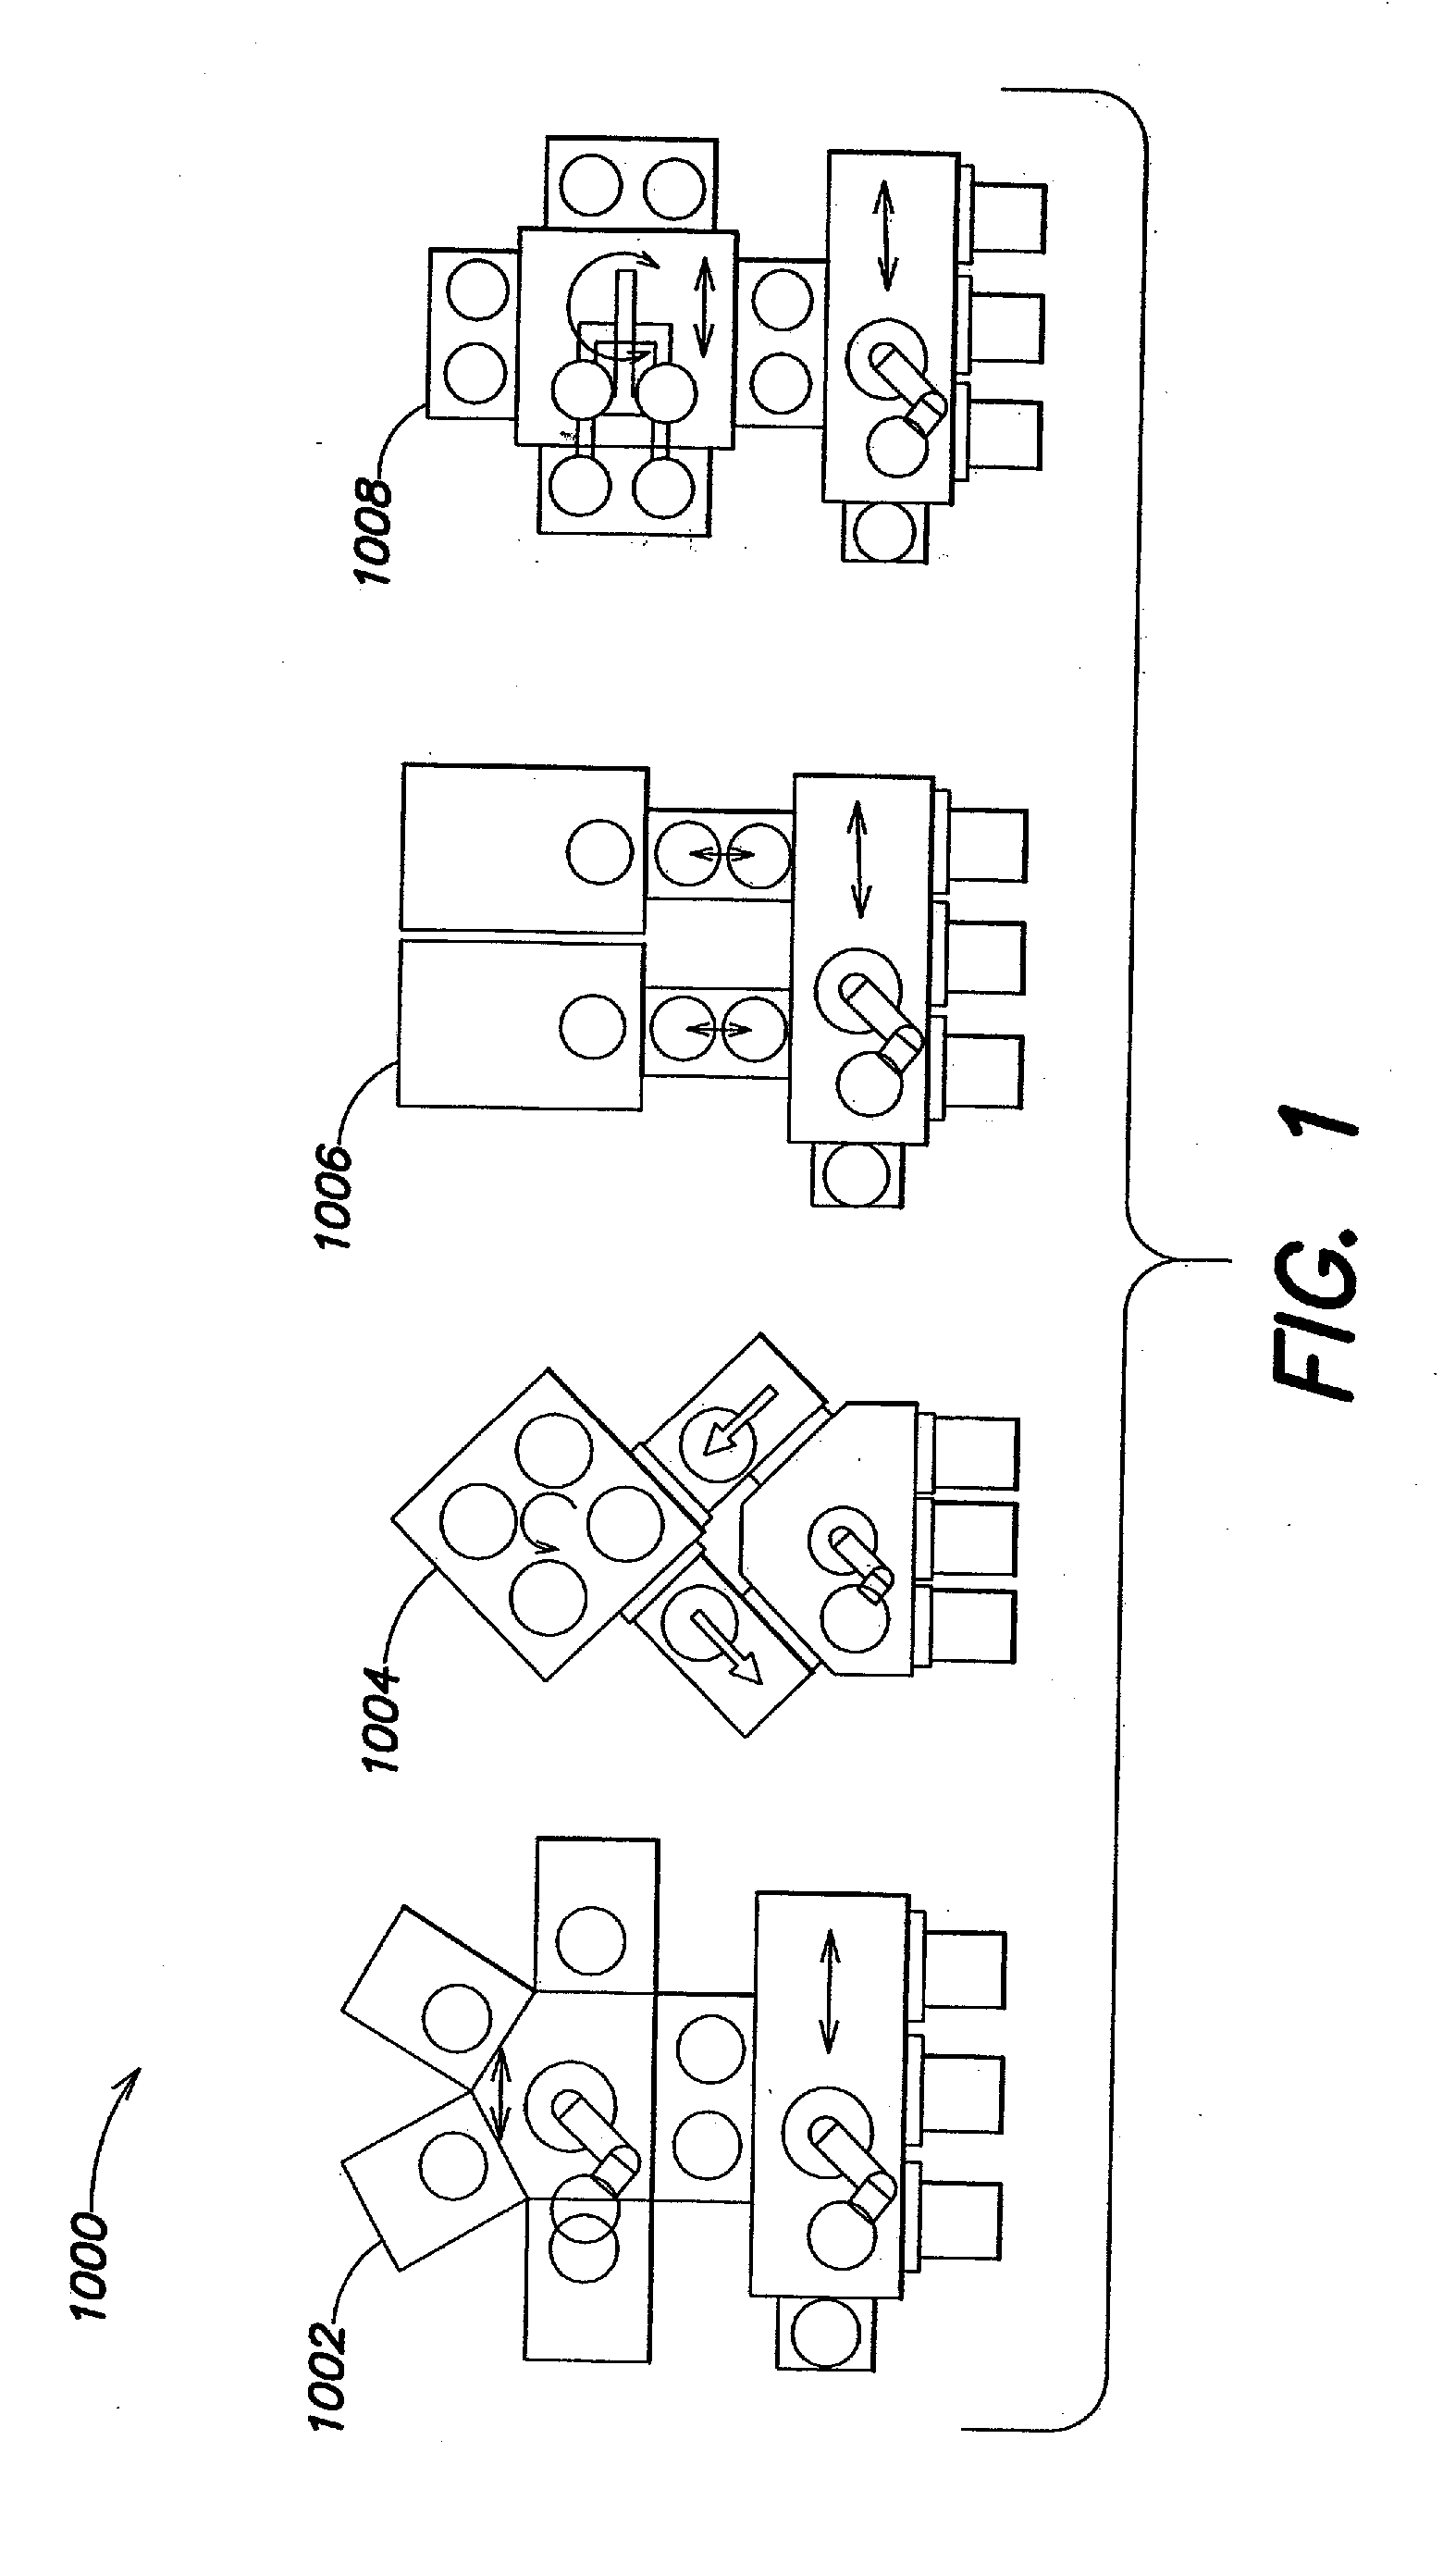 Semiconductor wafer handling and transport